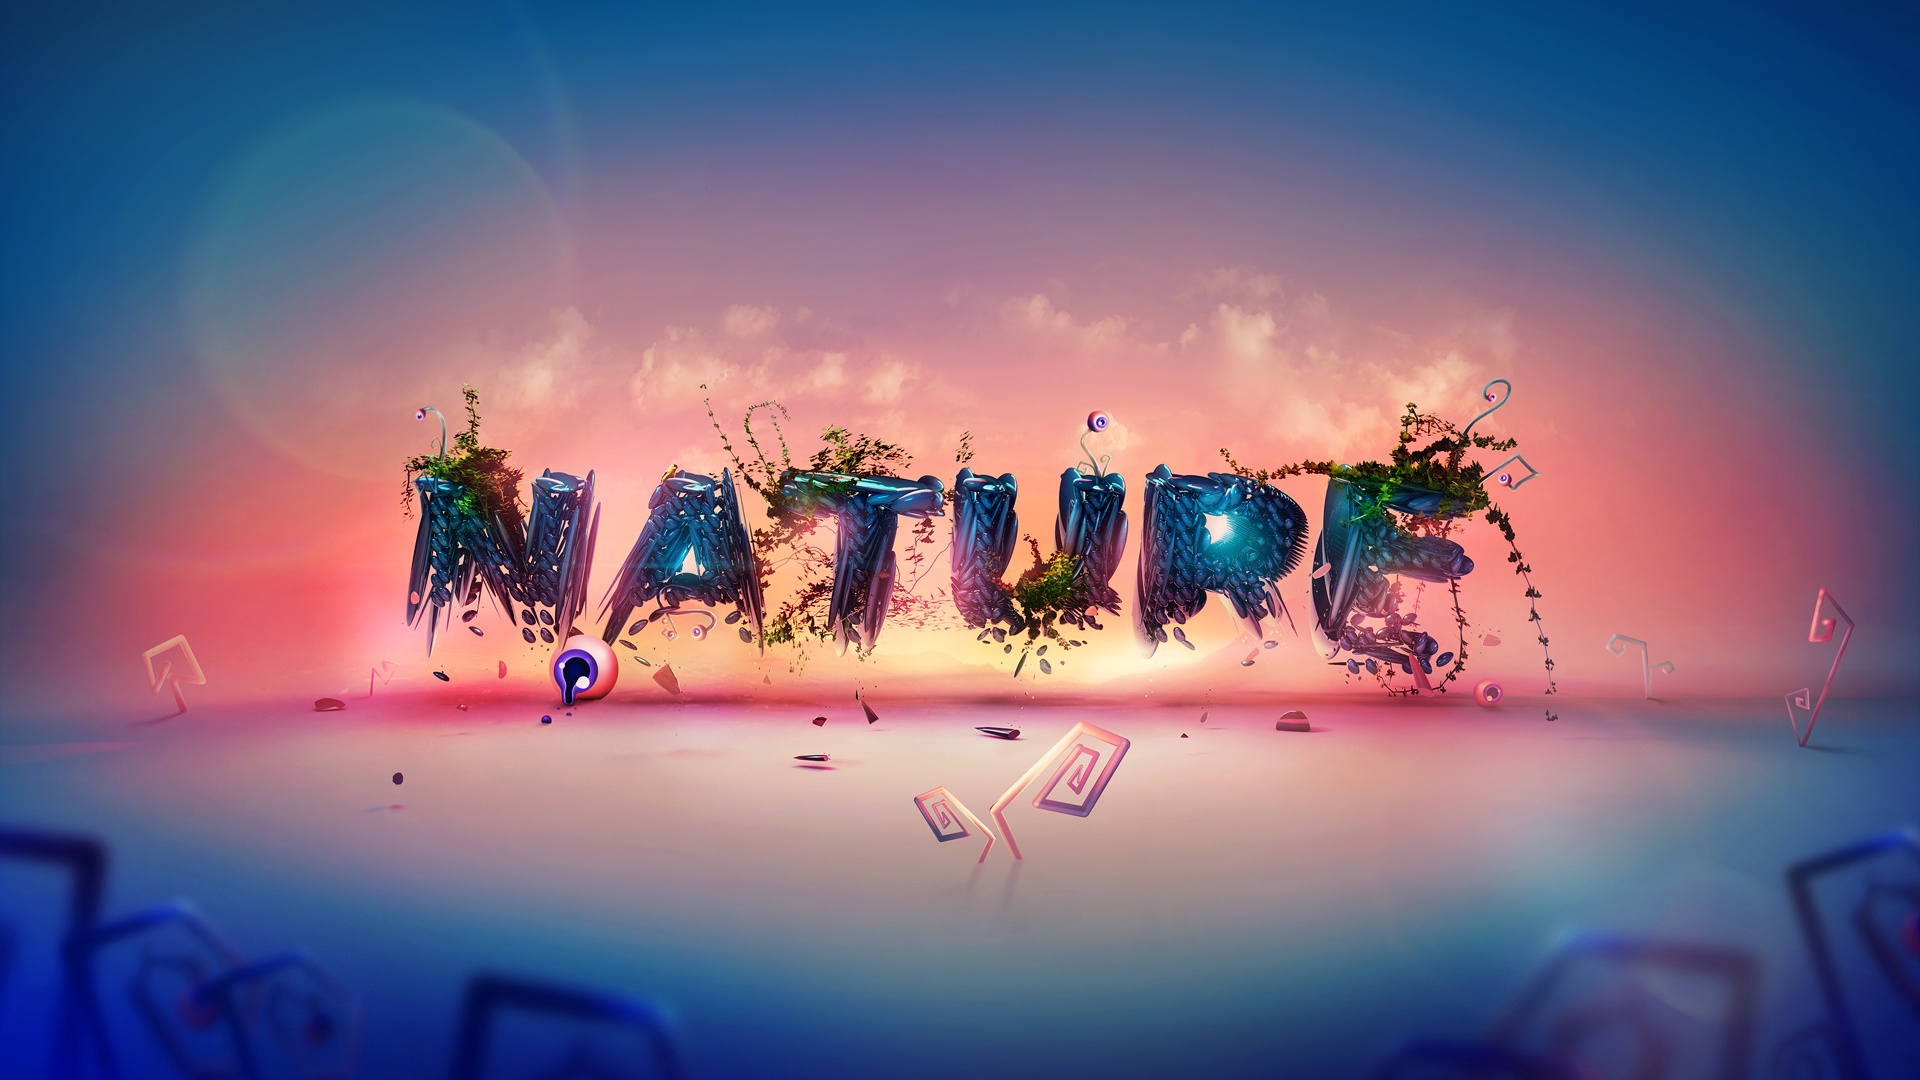 Artistic Nature HD Wallpaper | Background Image